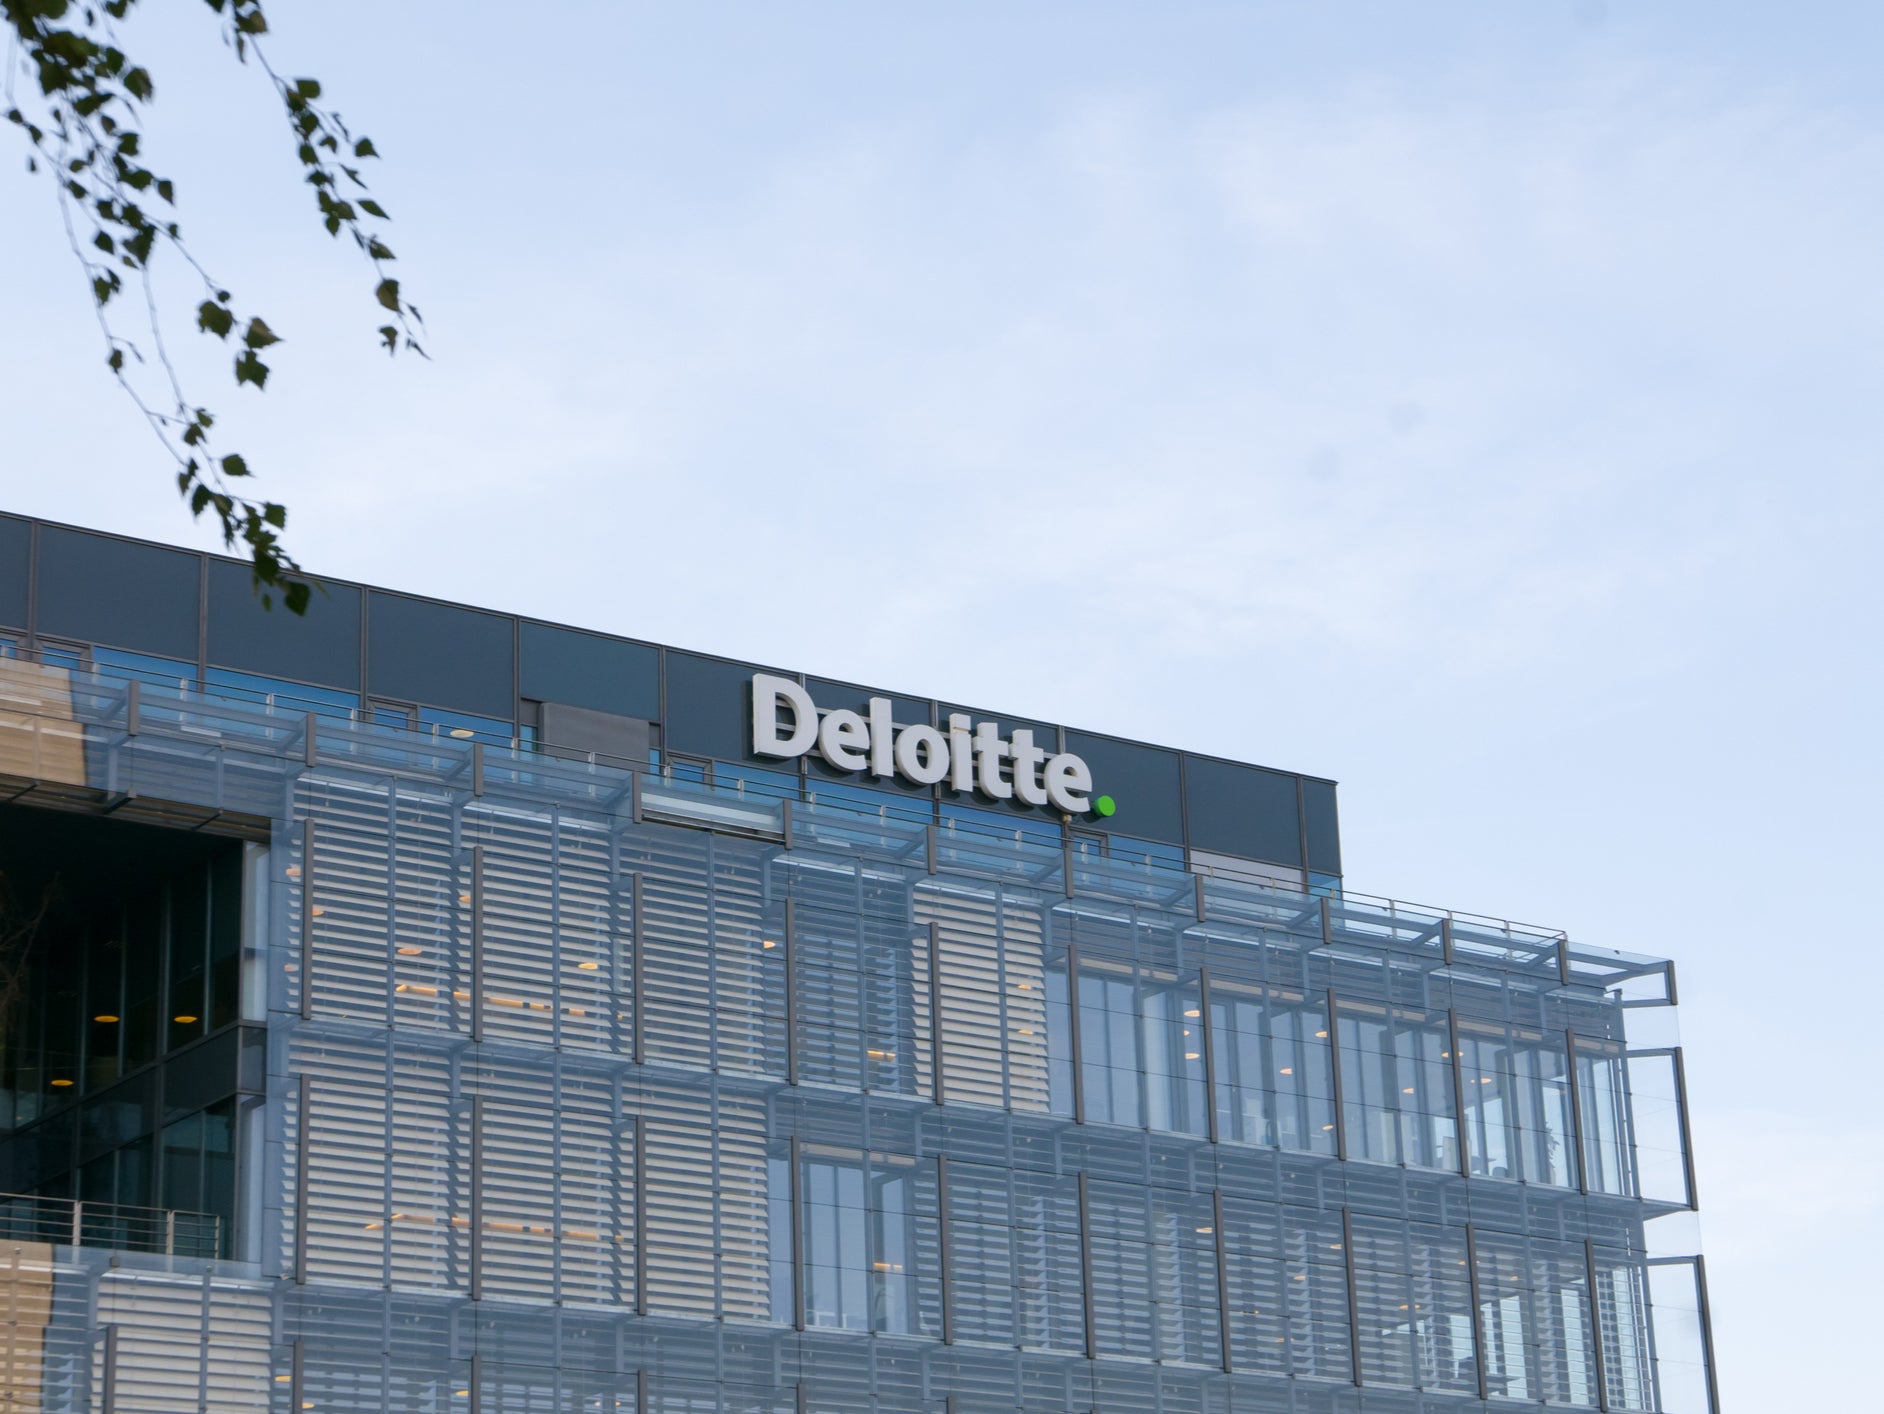 Deloitte’s employees in the UK will be able to ‘choose when, where and how they work in the future'